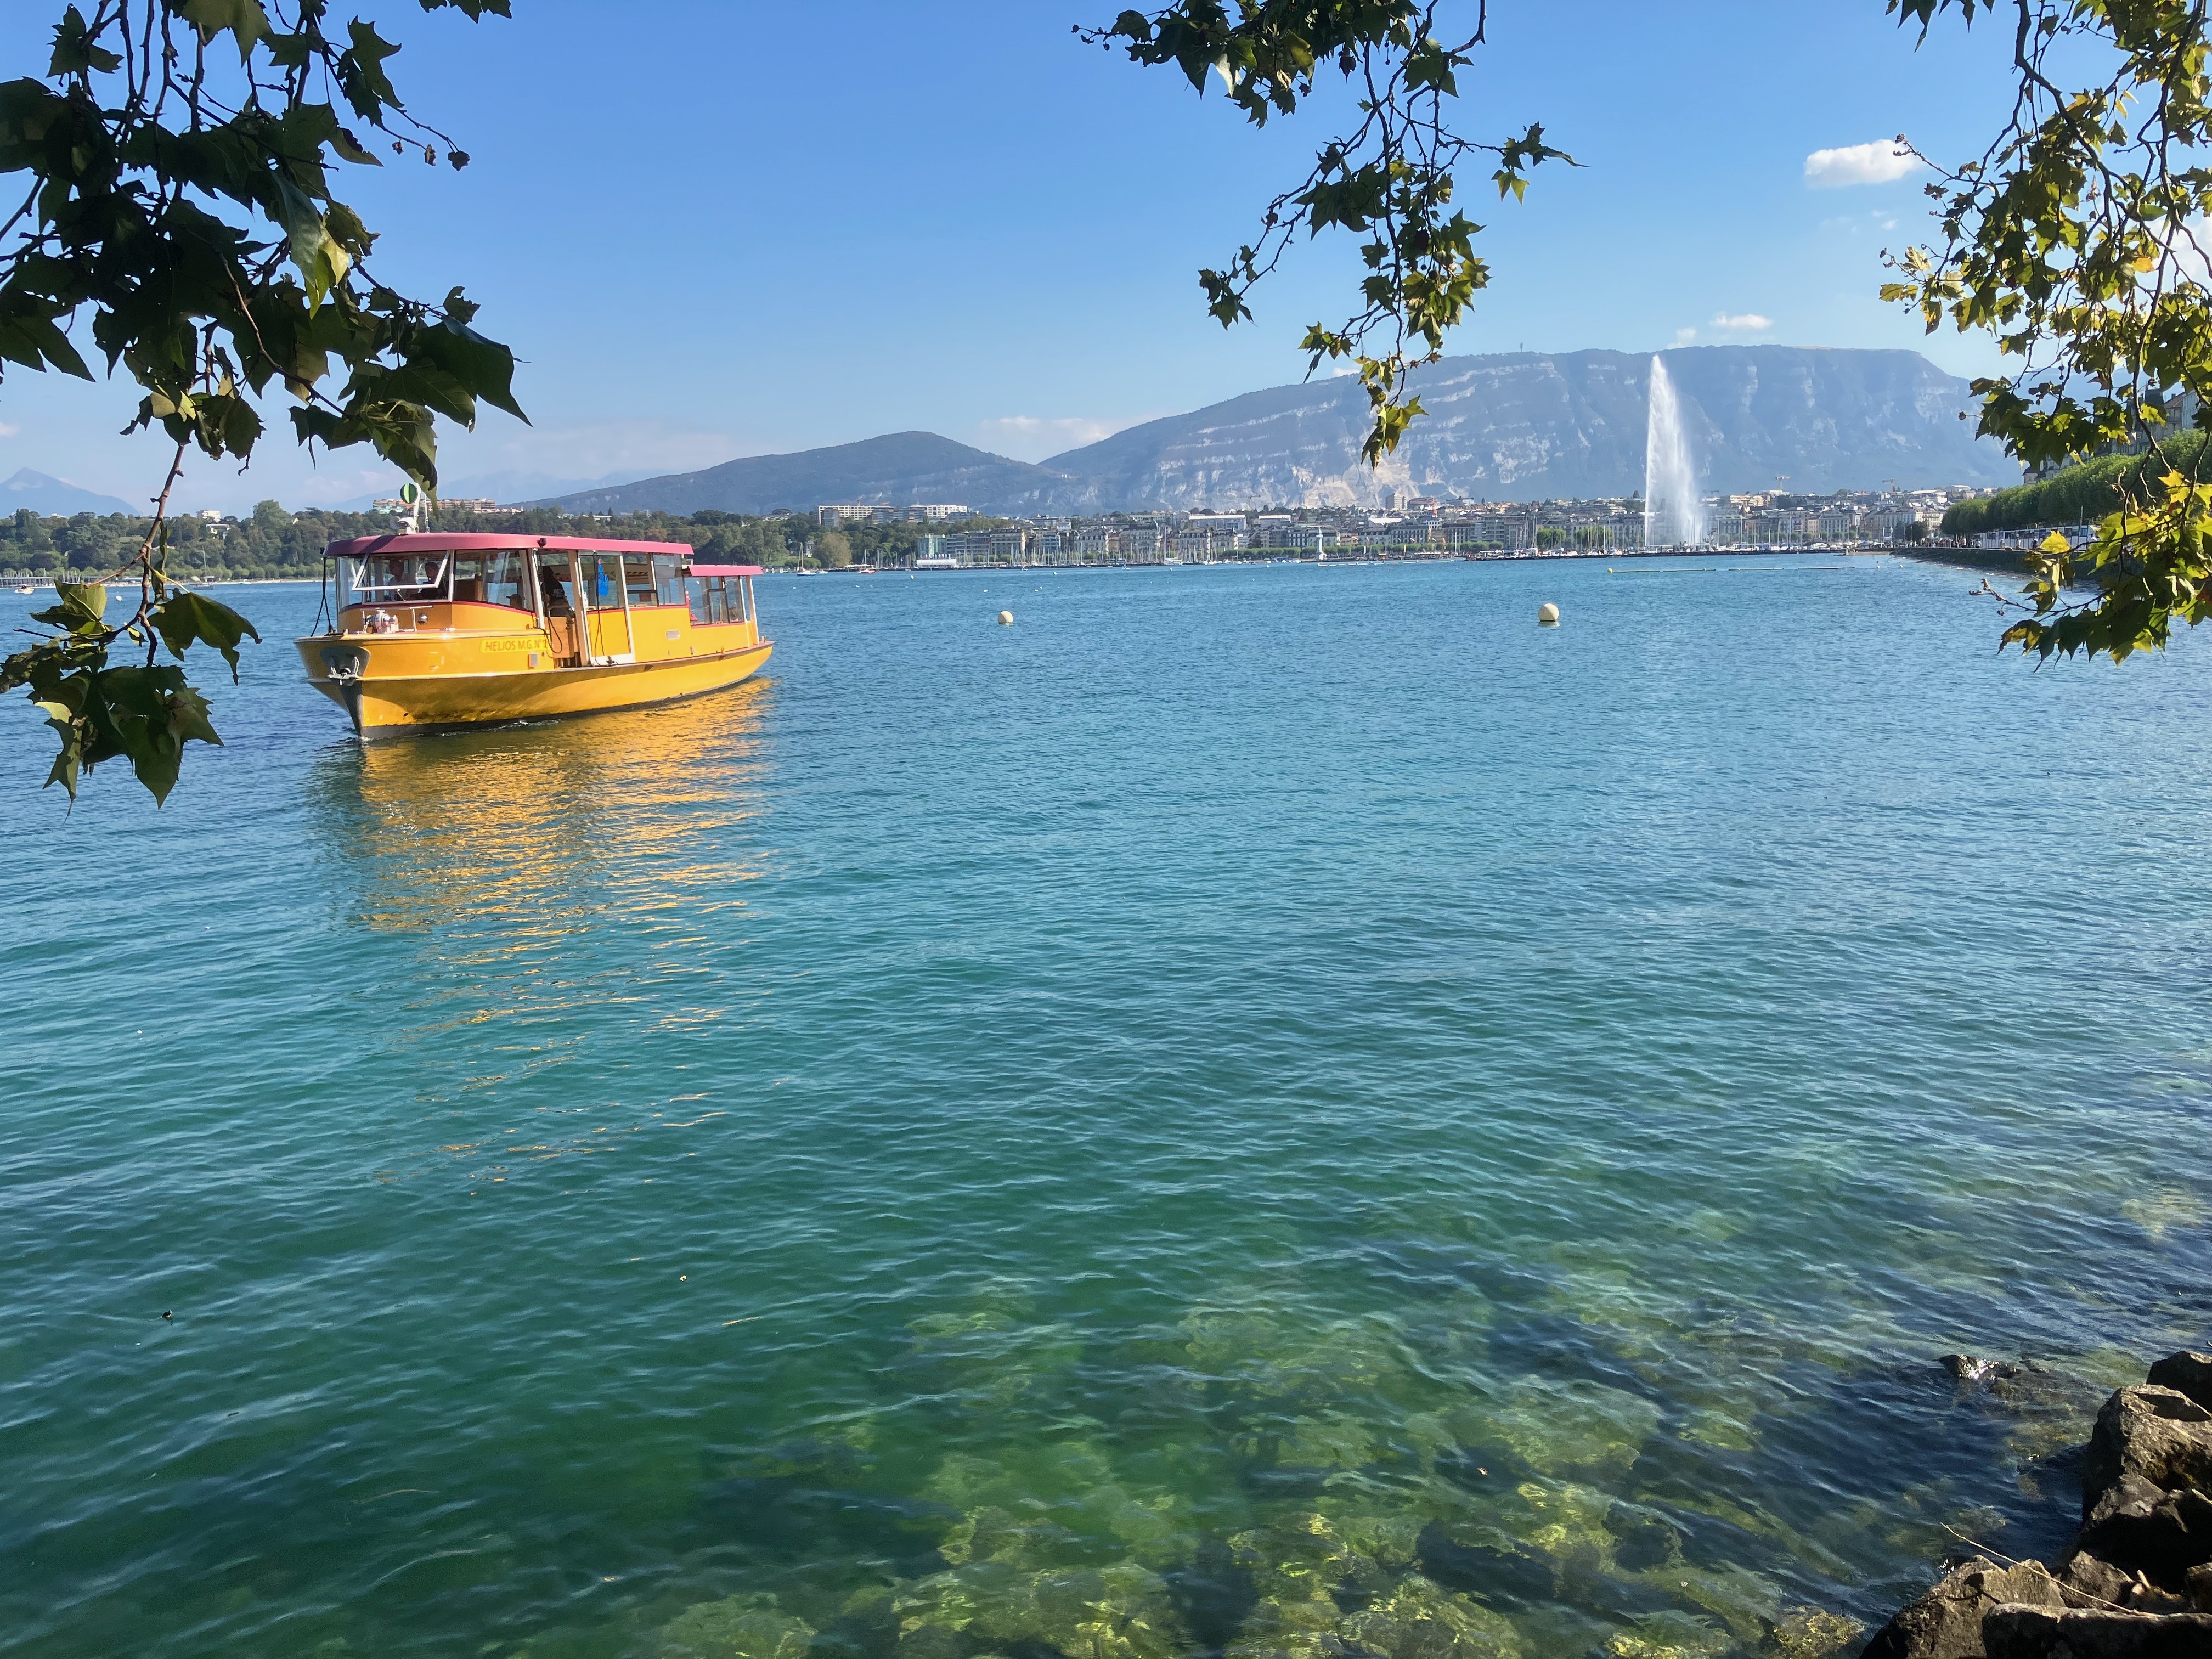 Sunny day with the blue water of Lake Geneva and a yellow boat on it. In the background is the famous Jet d'Eau fountain and the city of Geneva.